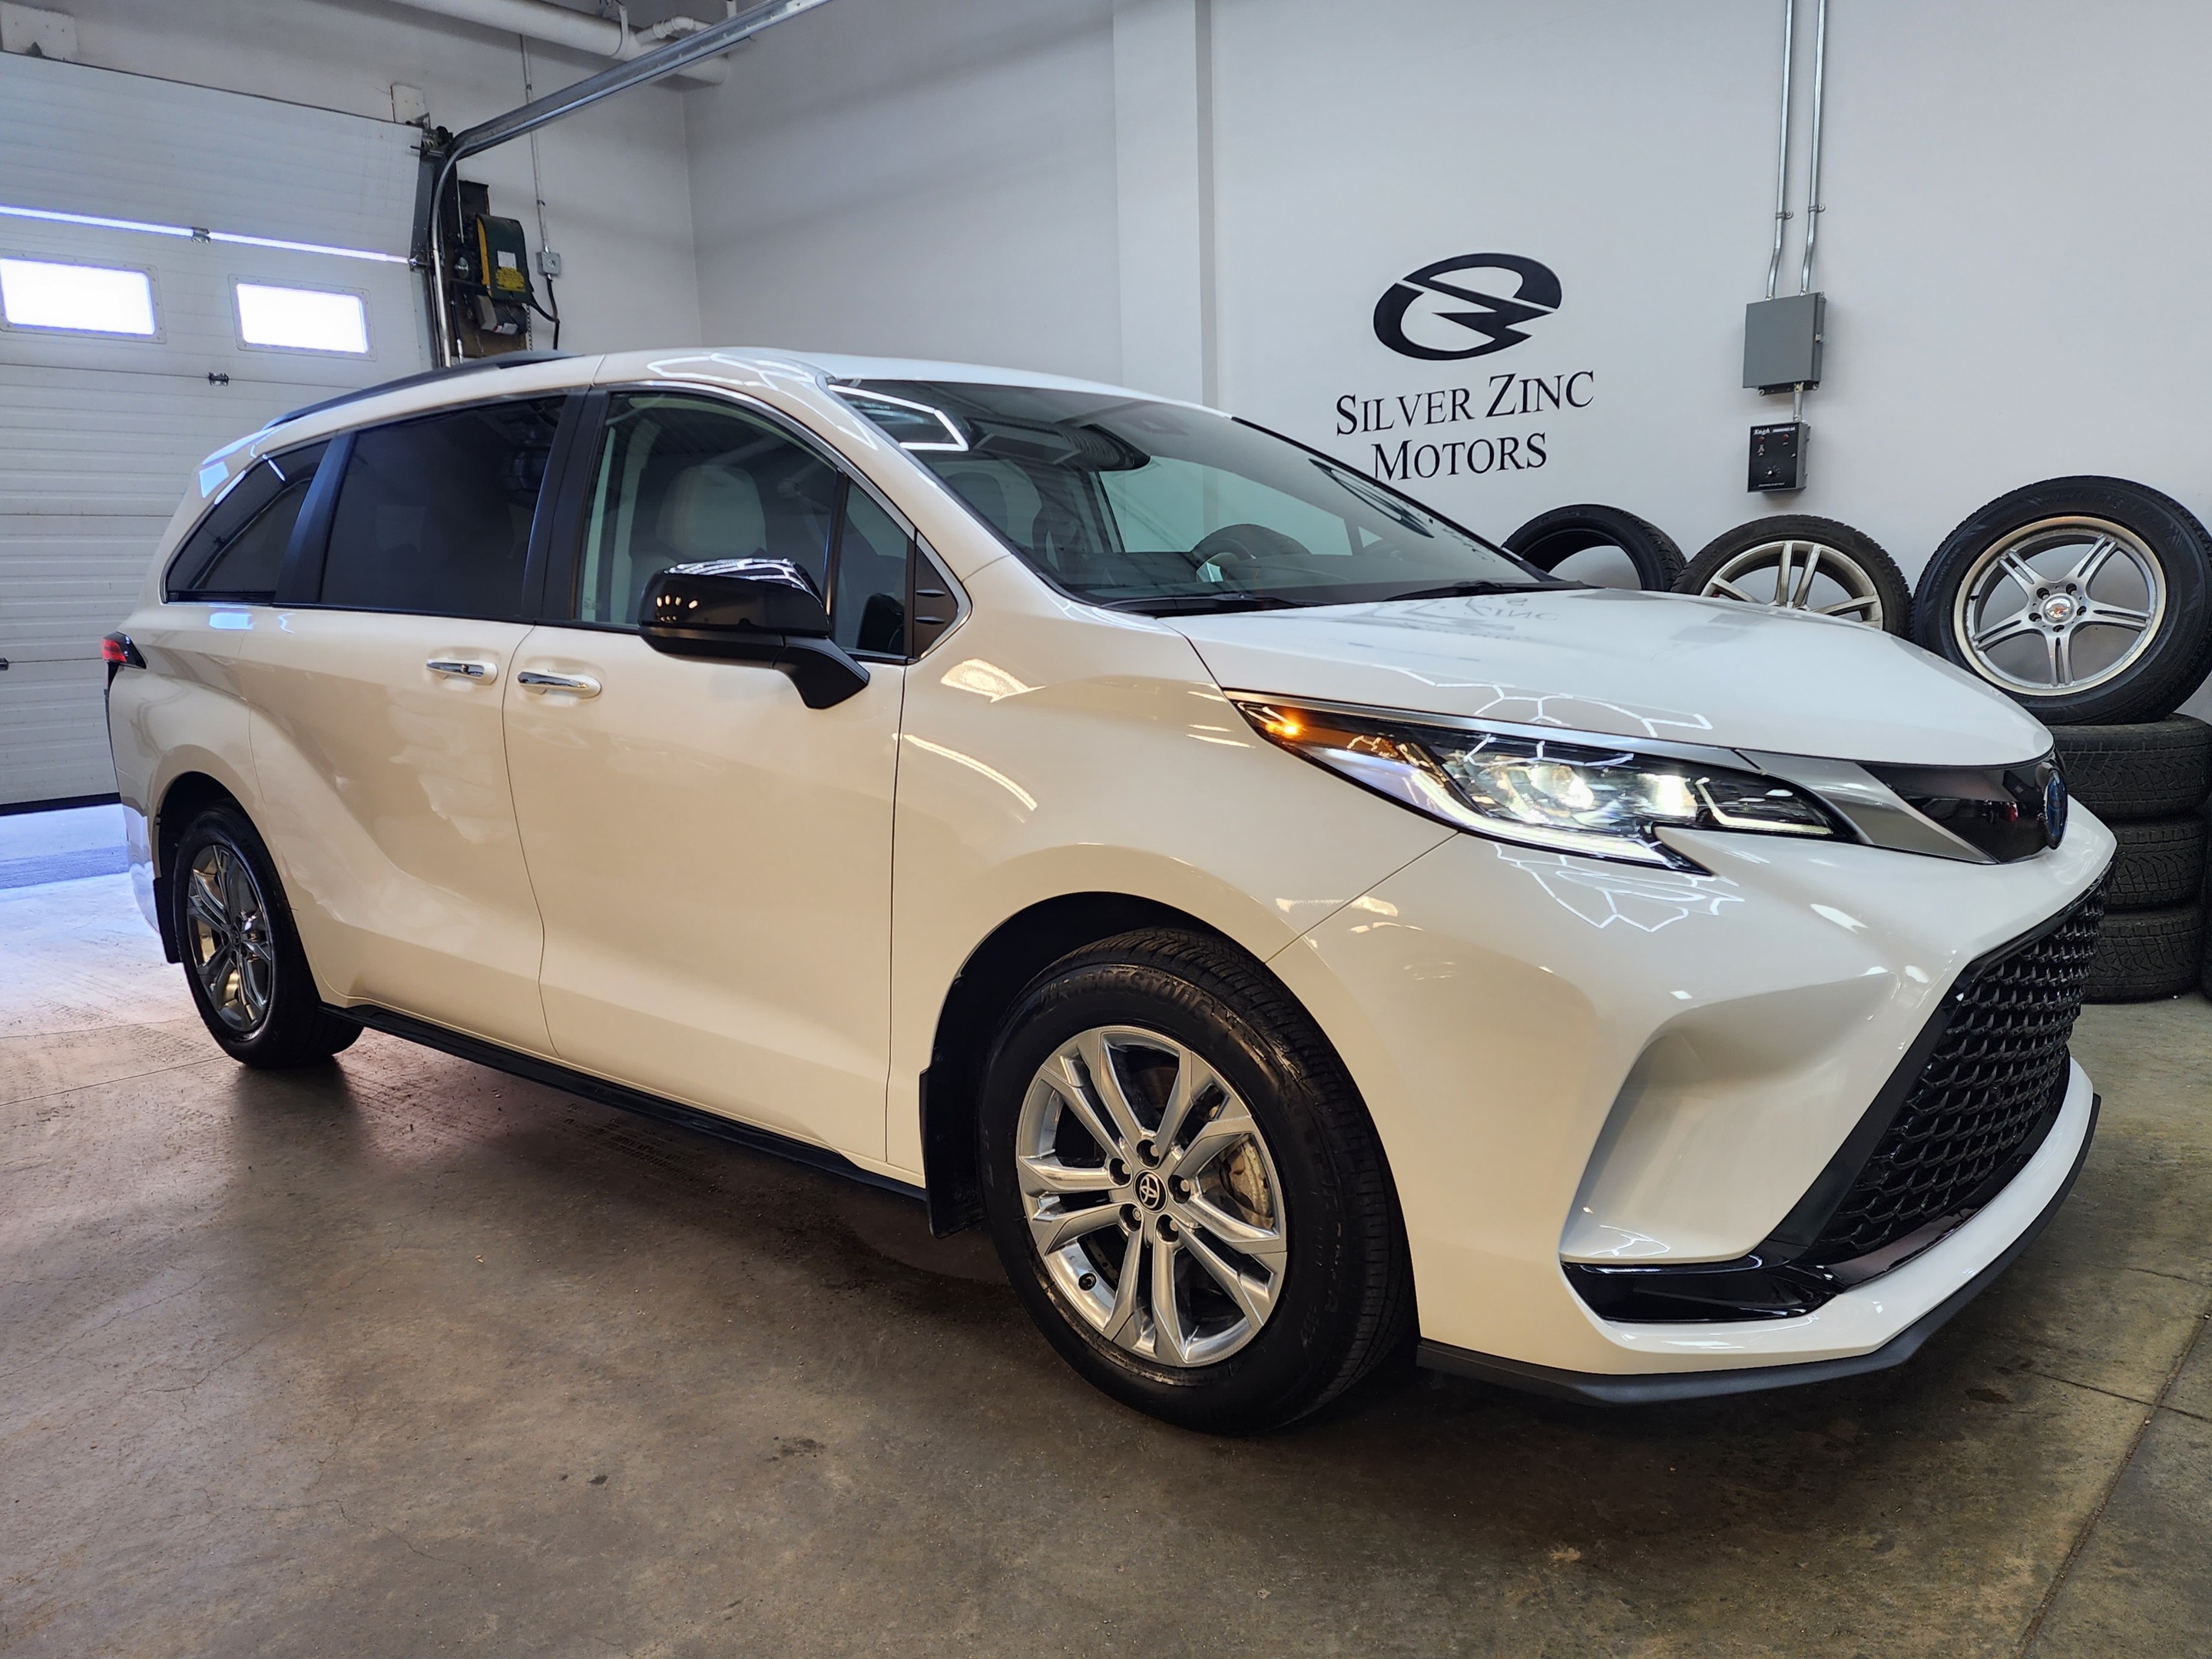 2022 Toyota Sienna XSE AWD, In Stock As New, 11 KMs, 2 Sets of Tires